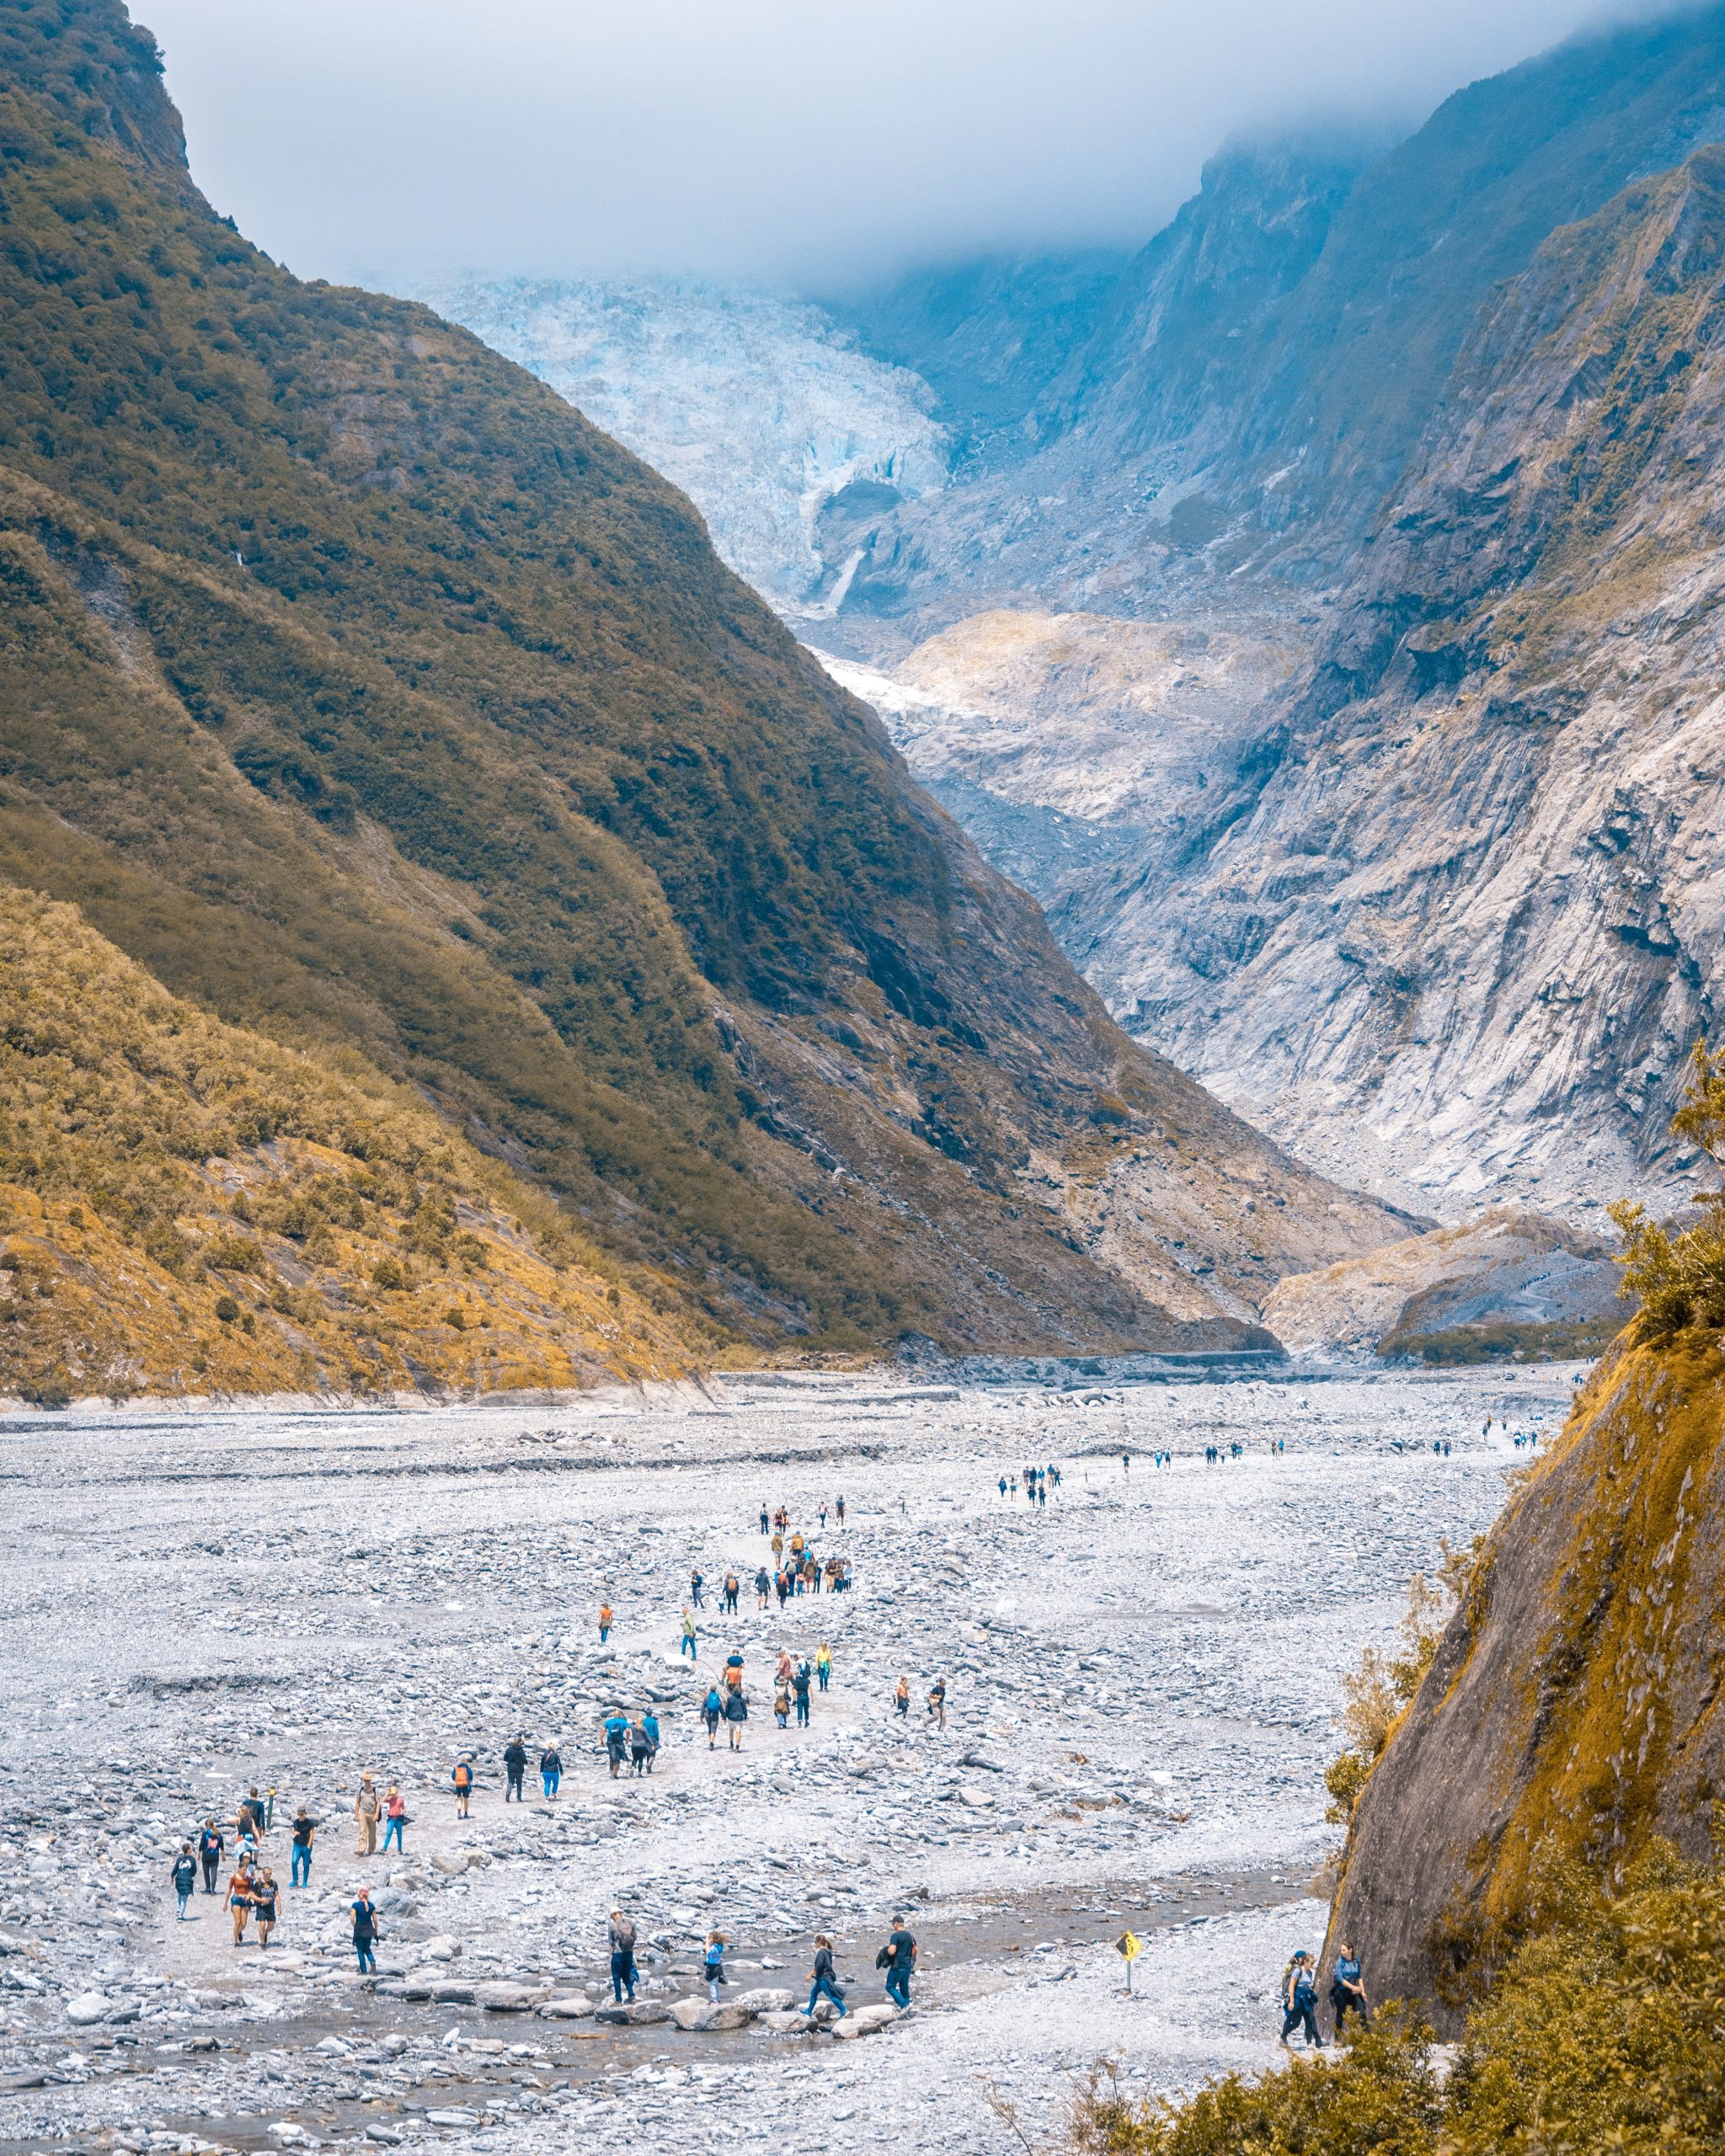 A retreating icy glacier with a rocky river bed in the foreground used by people walking towards the glacier.